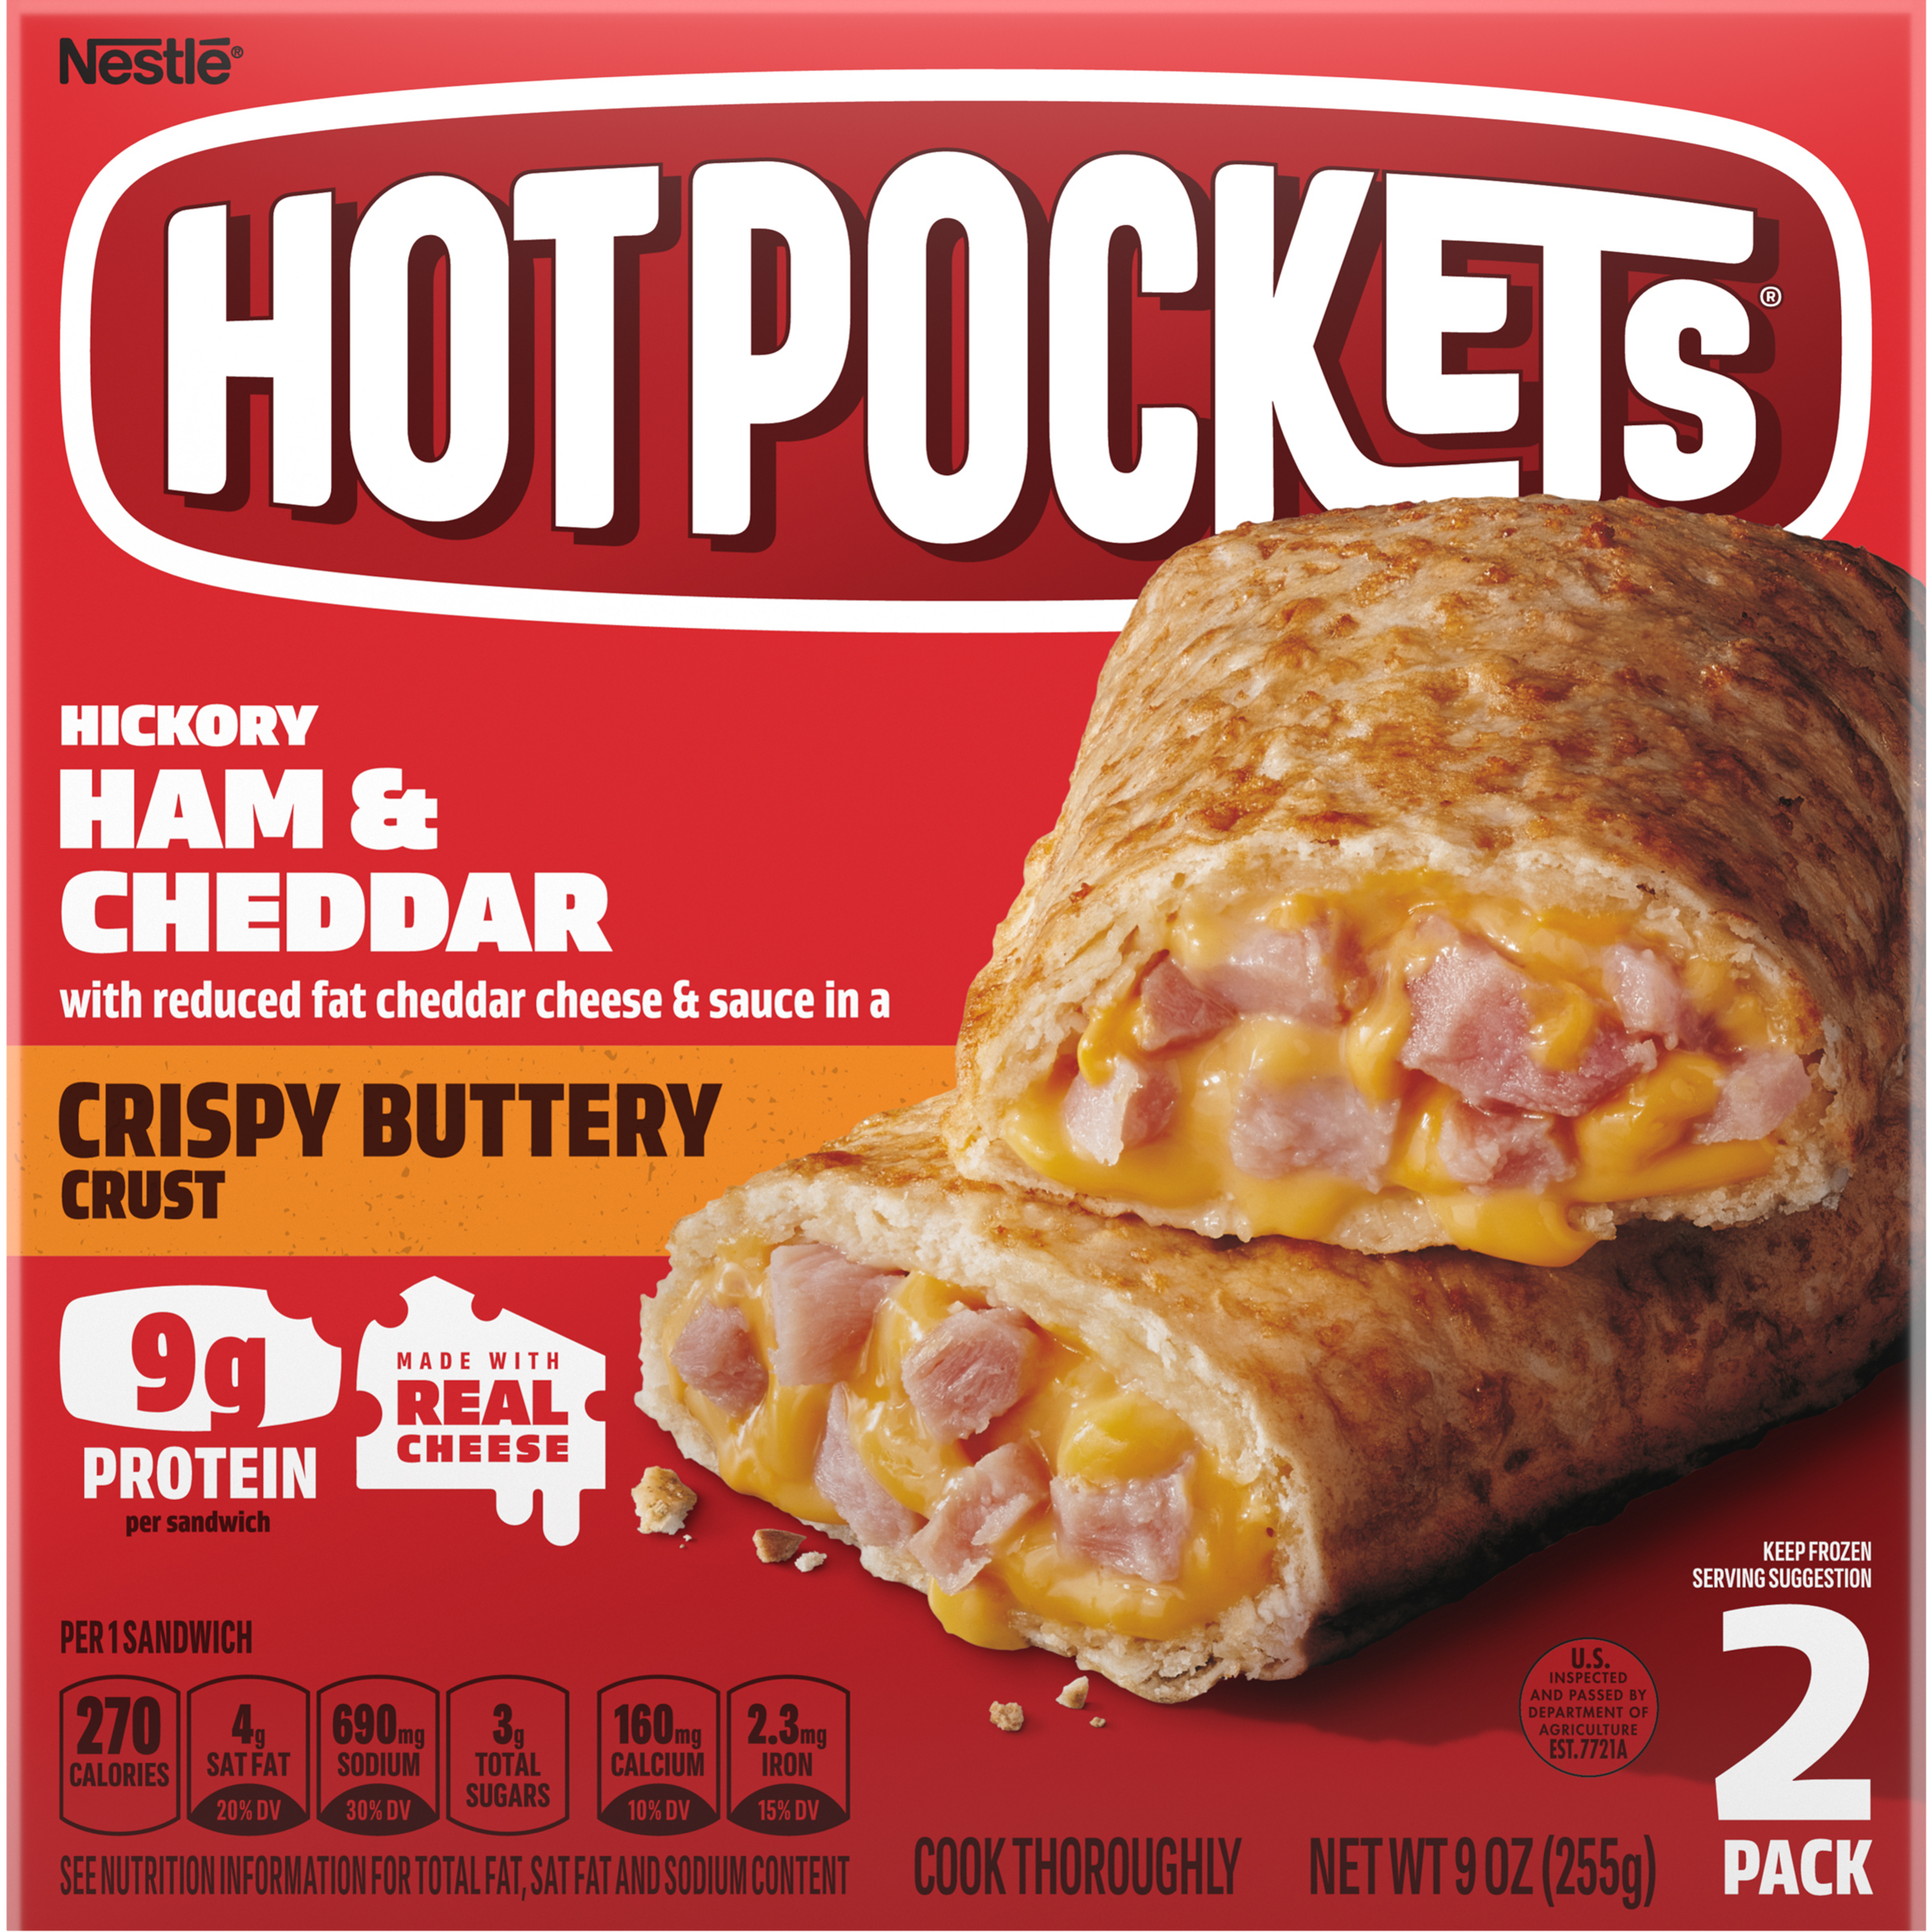 HOT POCKETS Crispy Buttery Crust Hickory Ham & Cheese 8 units per case 9.0 oz